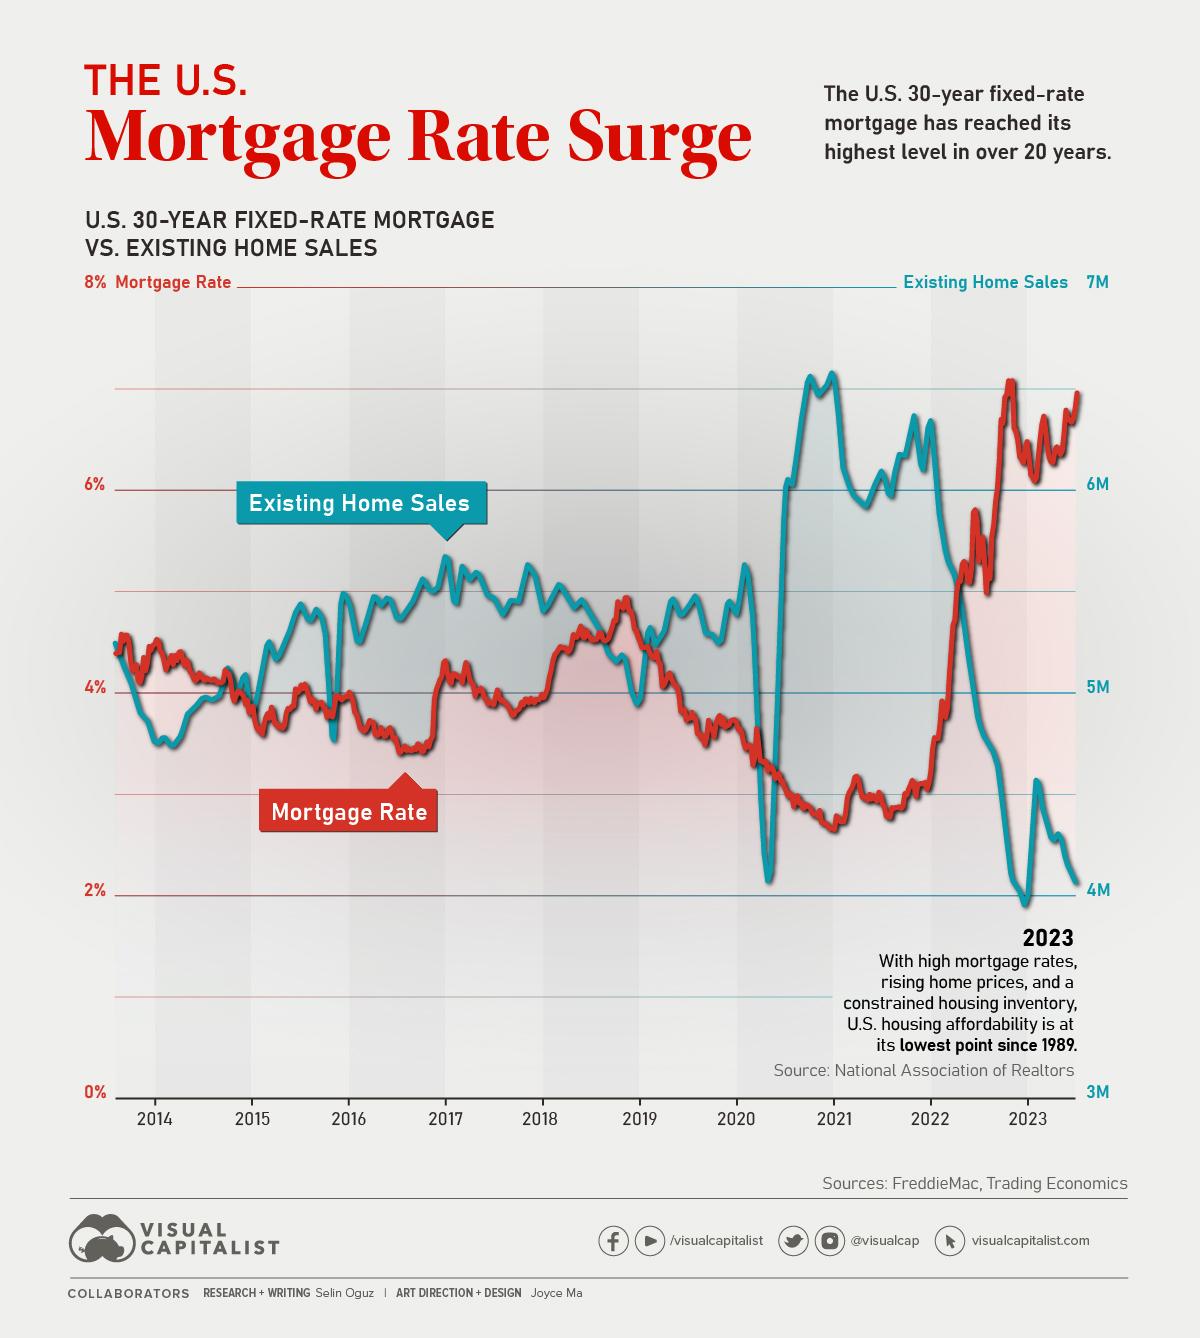 chart showing the rising u.s. mortgage rate from 2013-2023